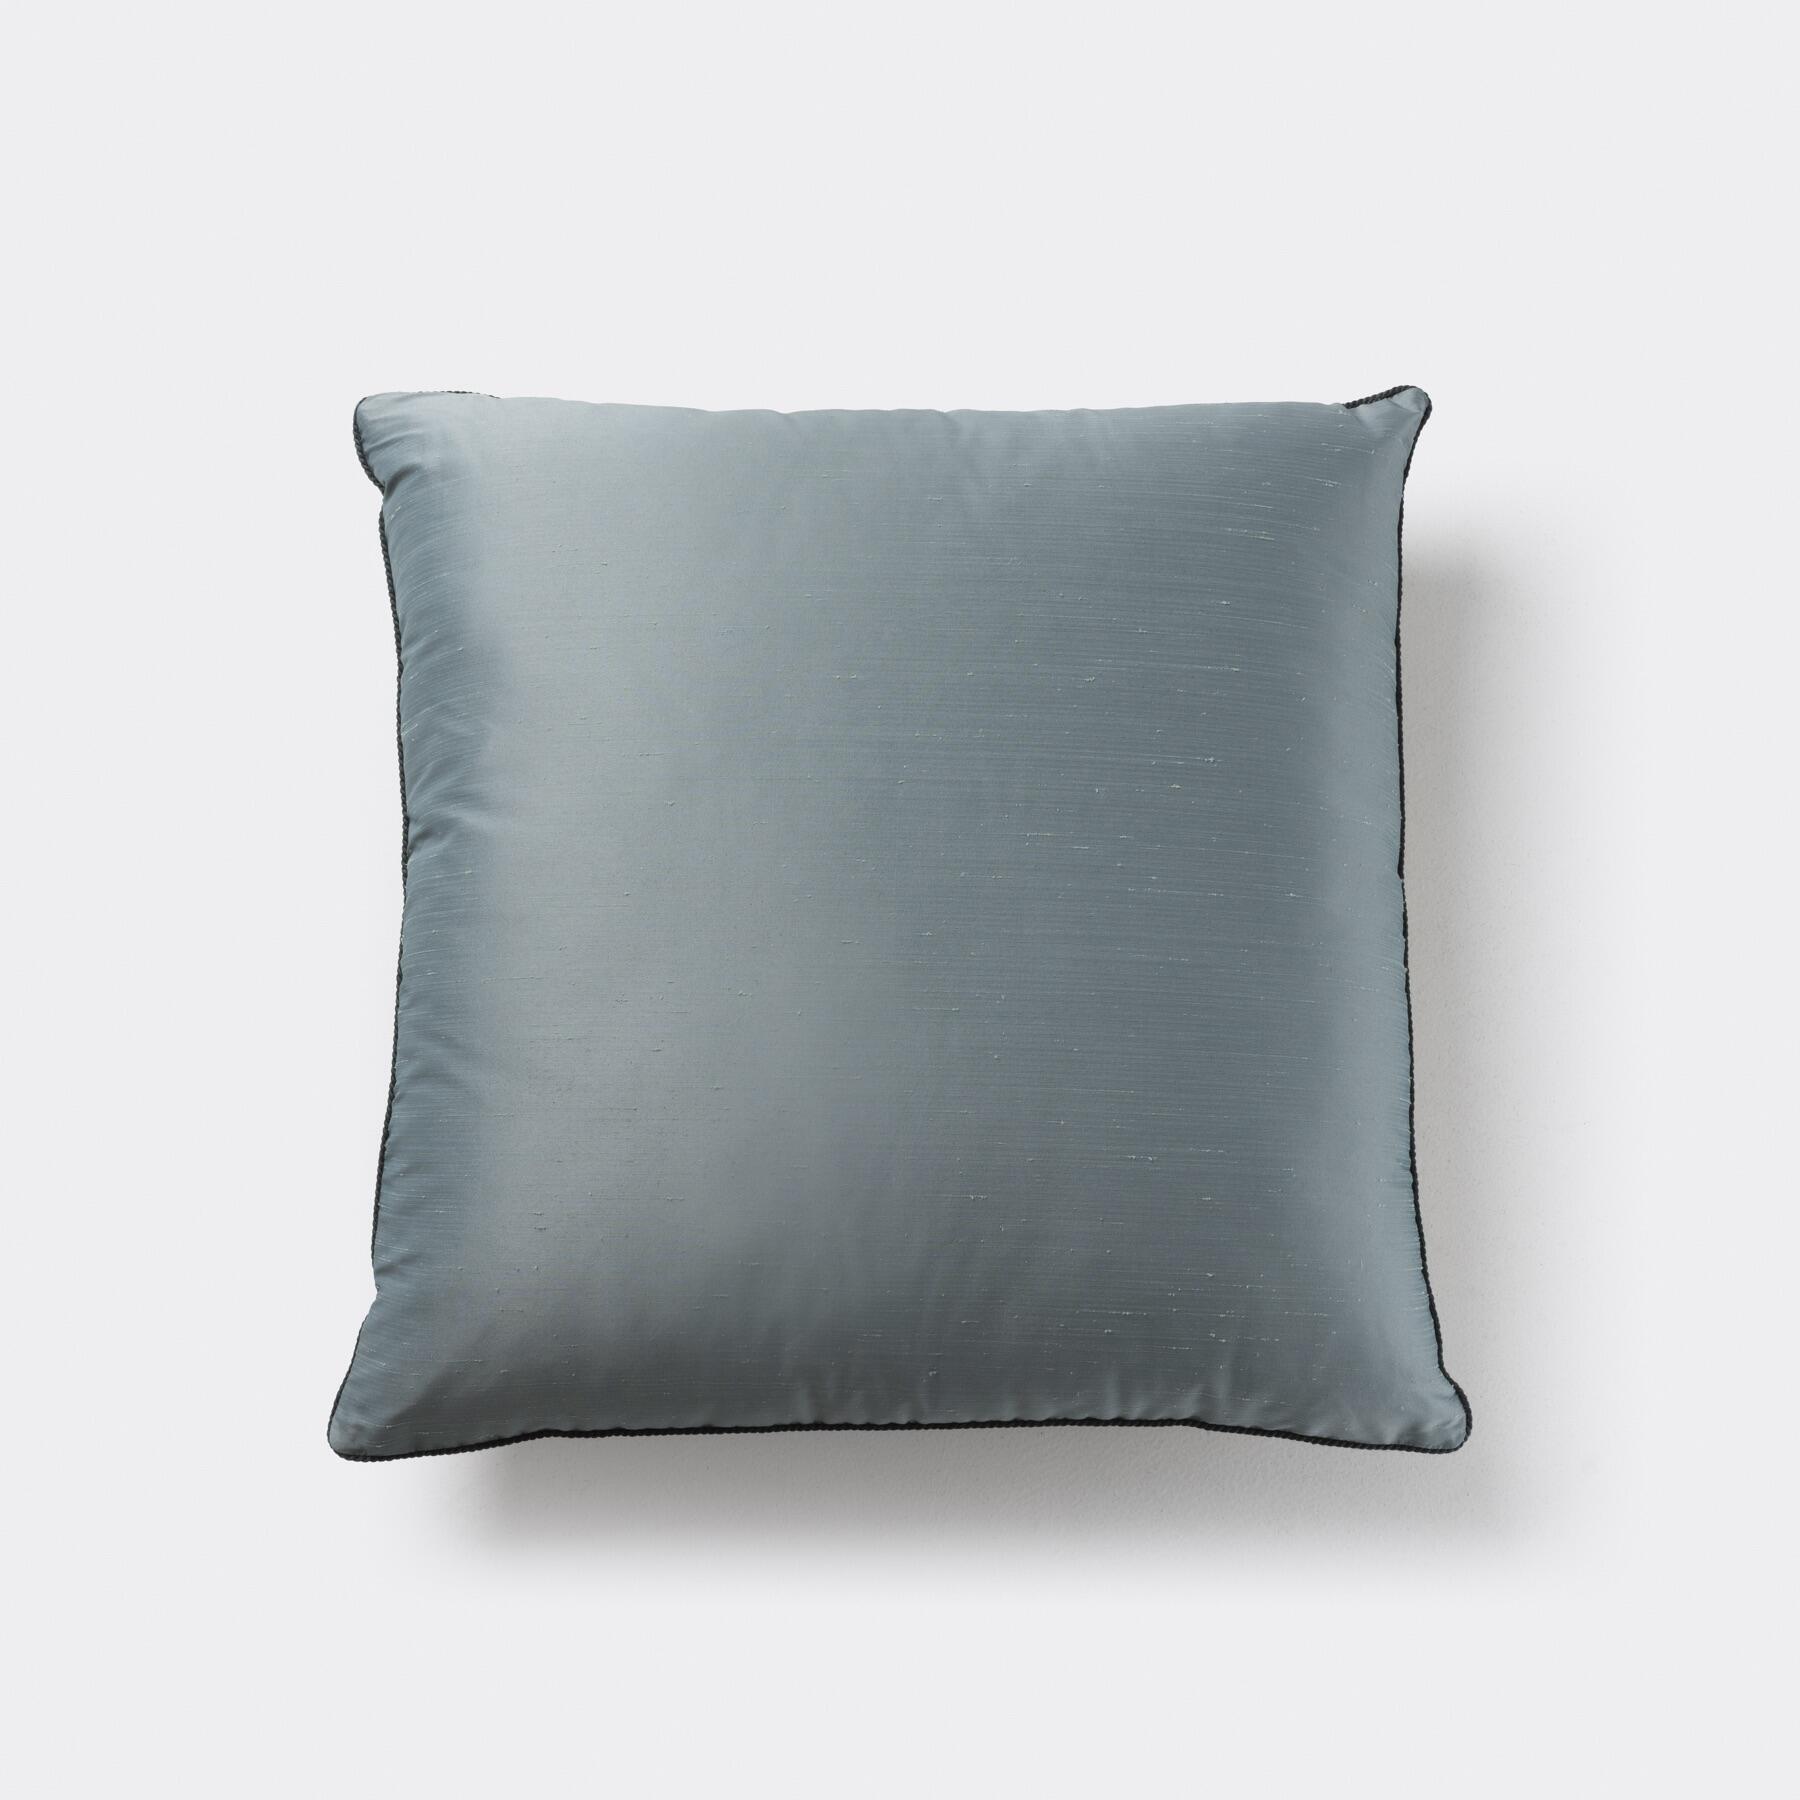 Throw Pillow, 22 x 22 in, Andrea: Echo